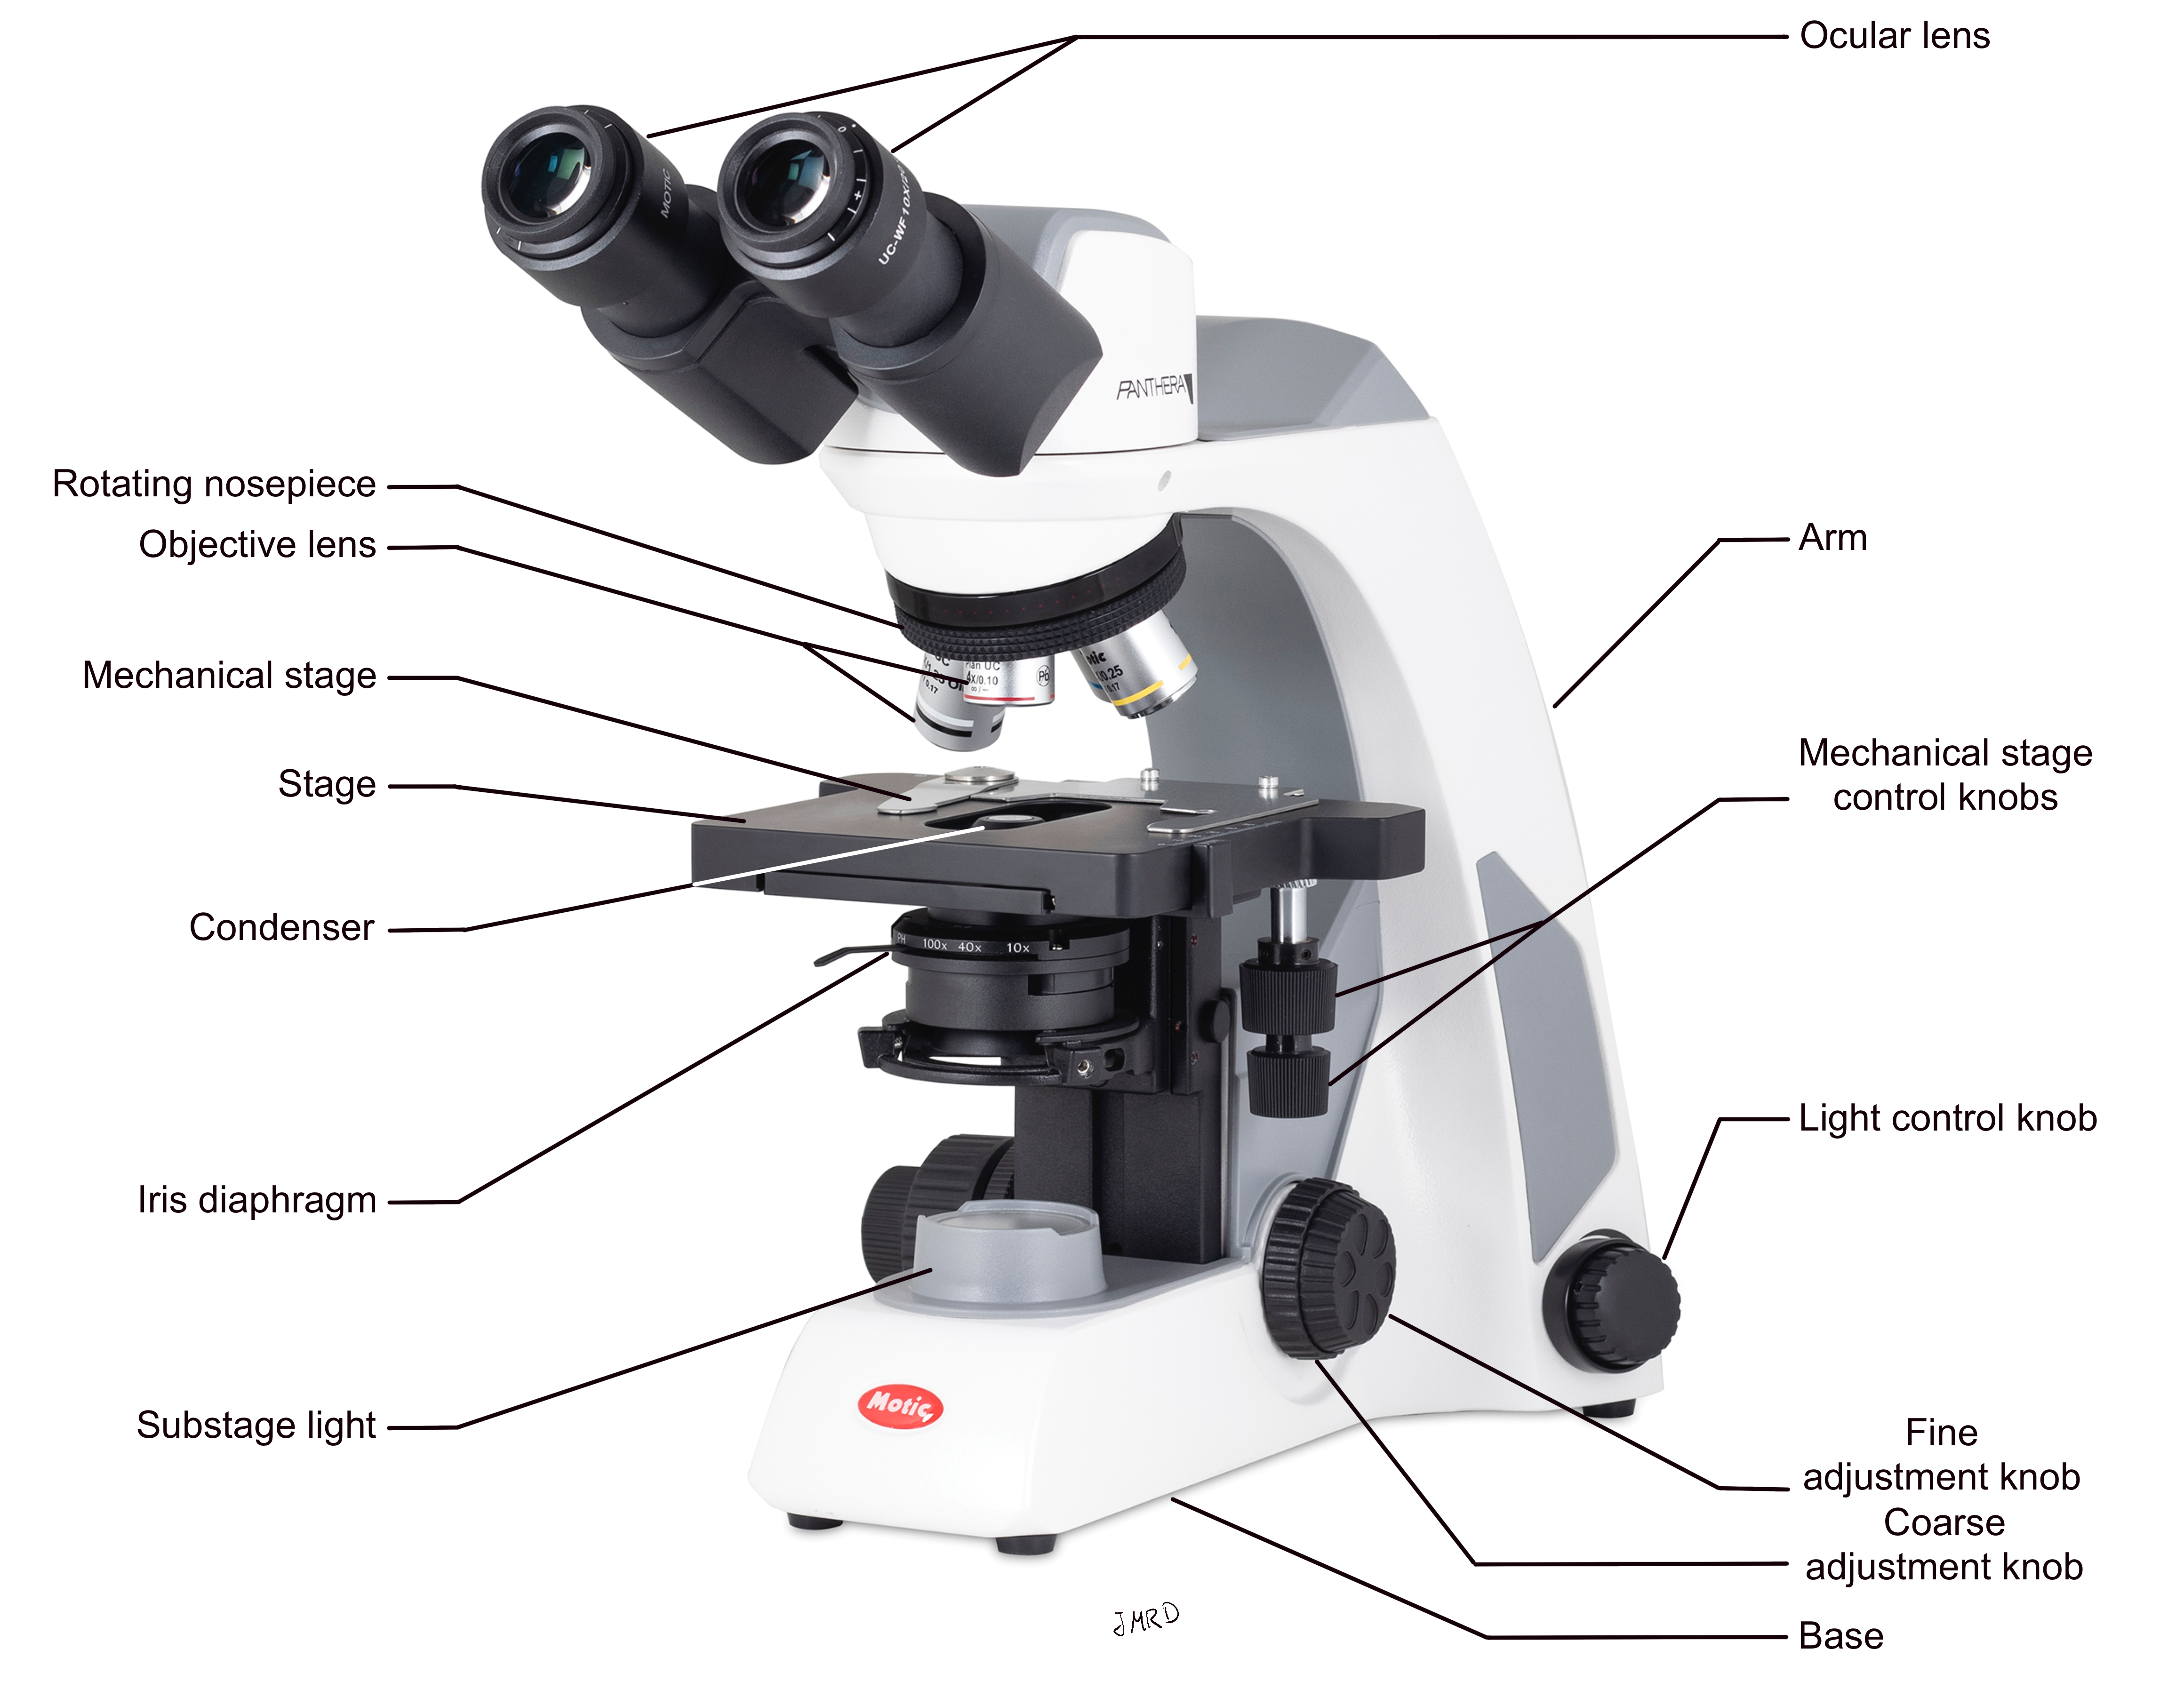 Motic Panthera E2 Microscope with relevant parts labeled